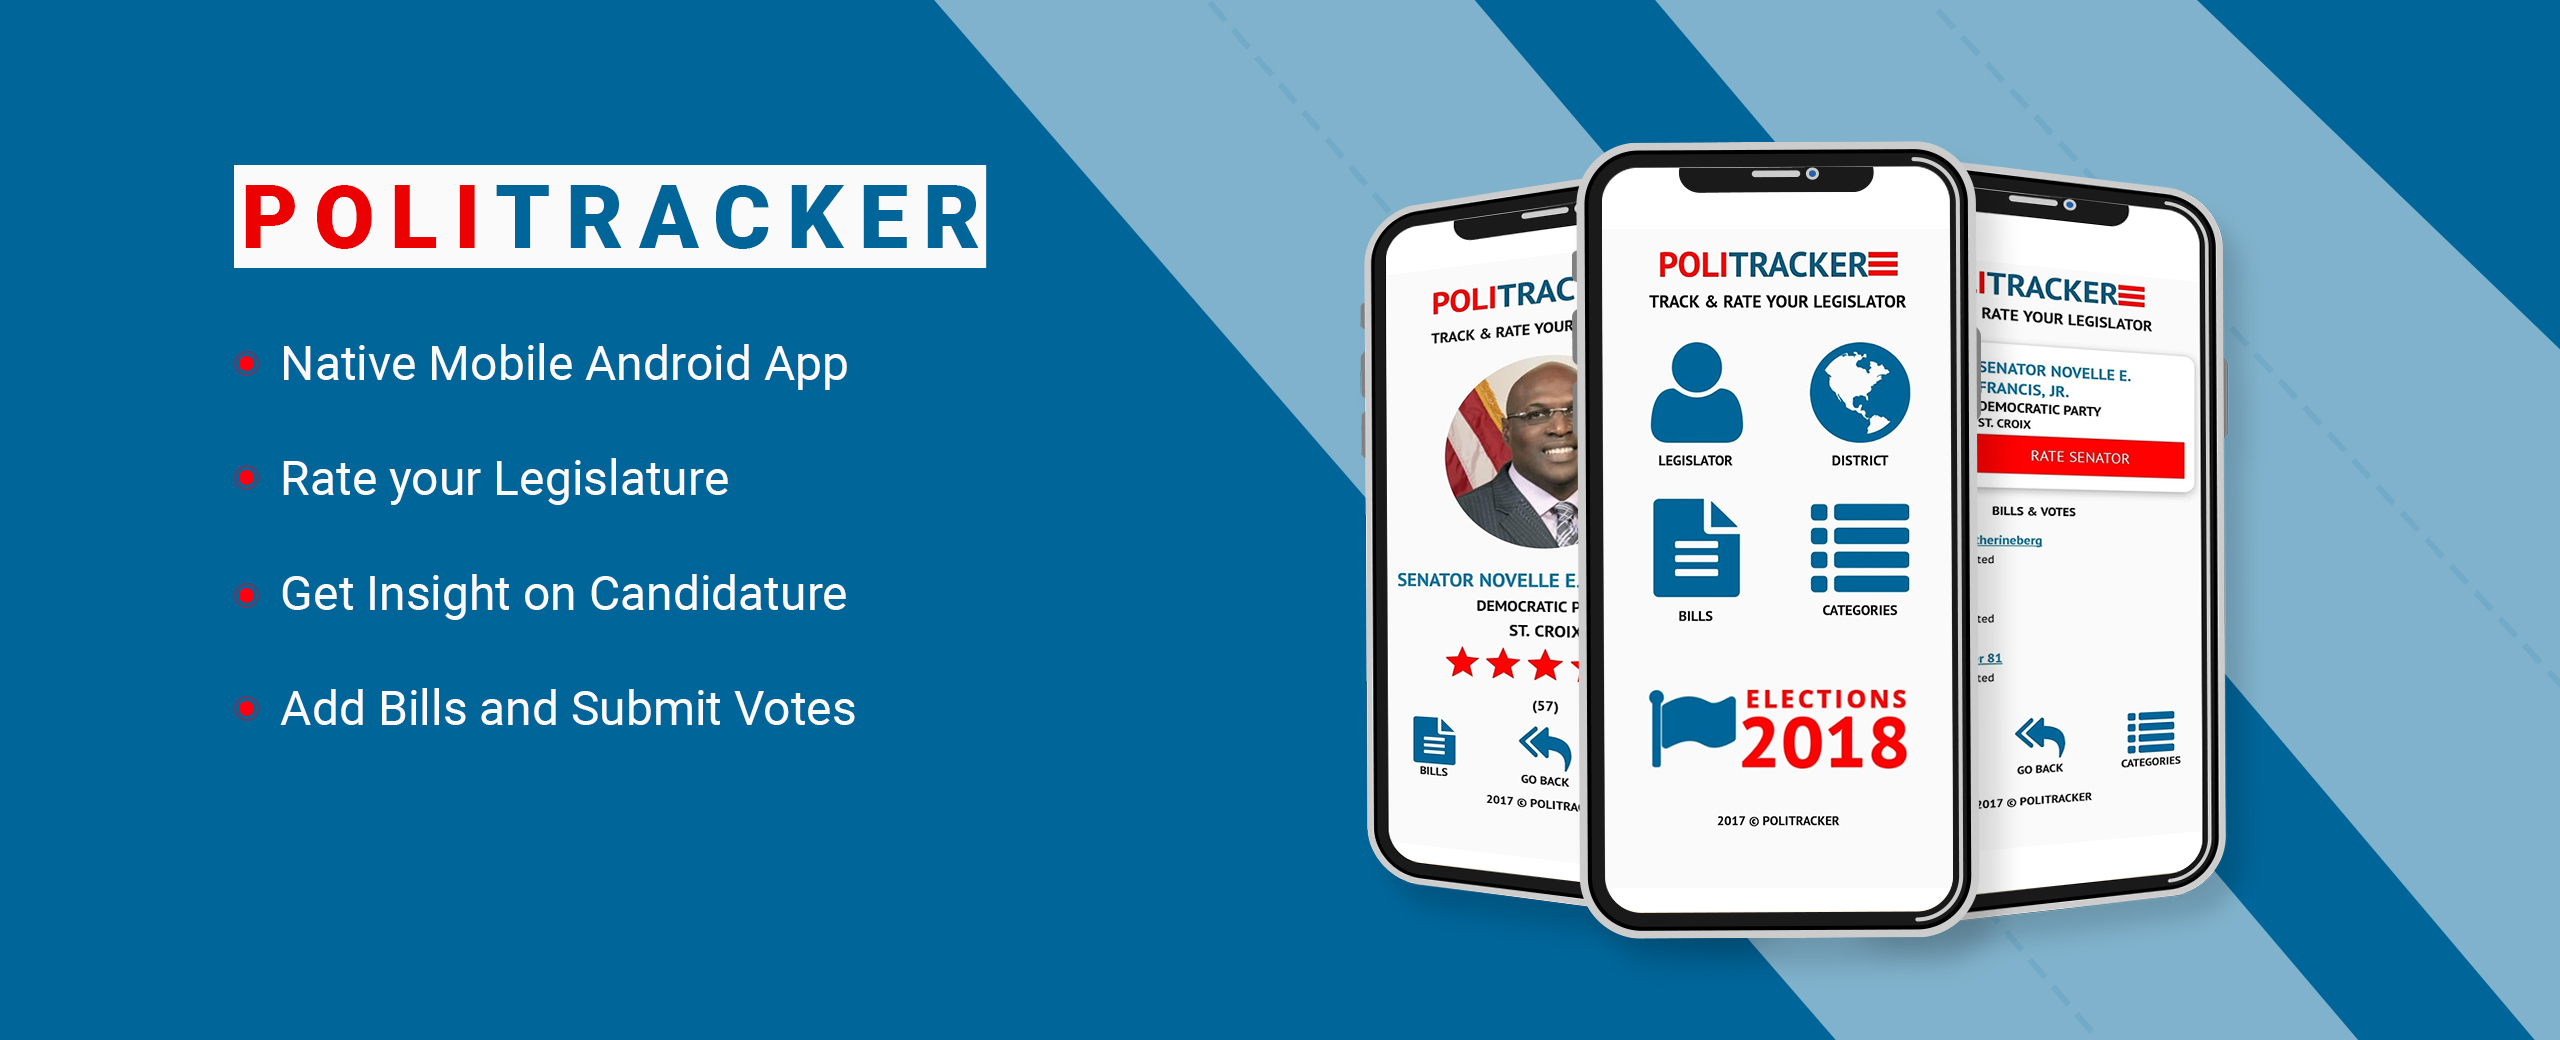 A primary data research agency hired our Mobile App experts for Political tracking App development